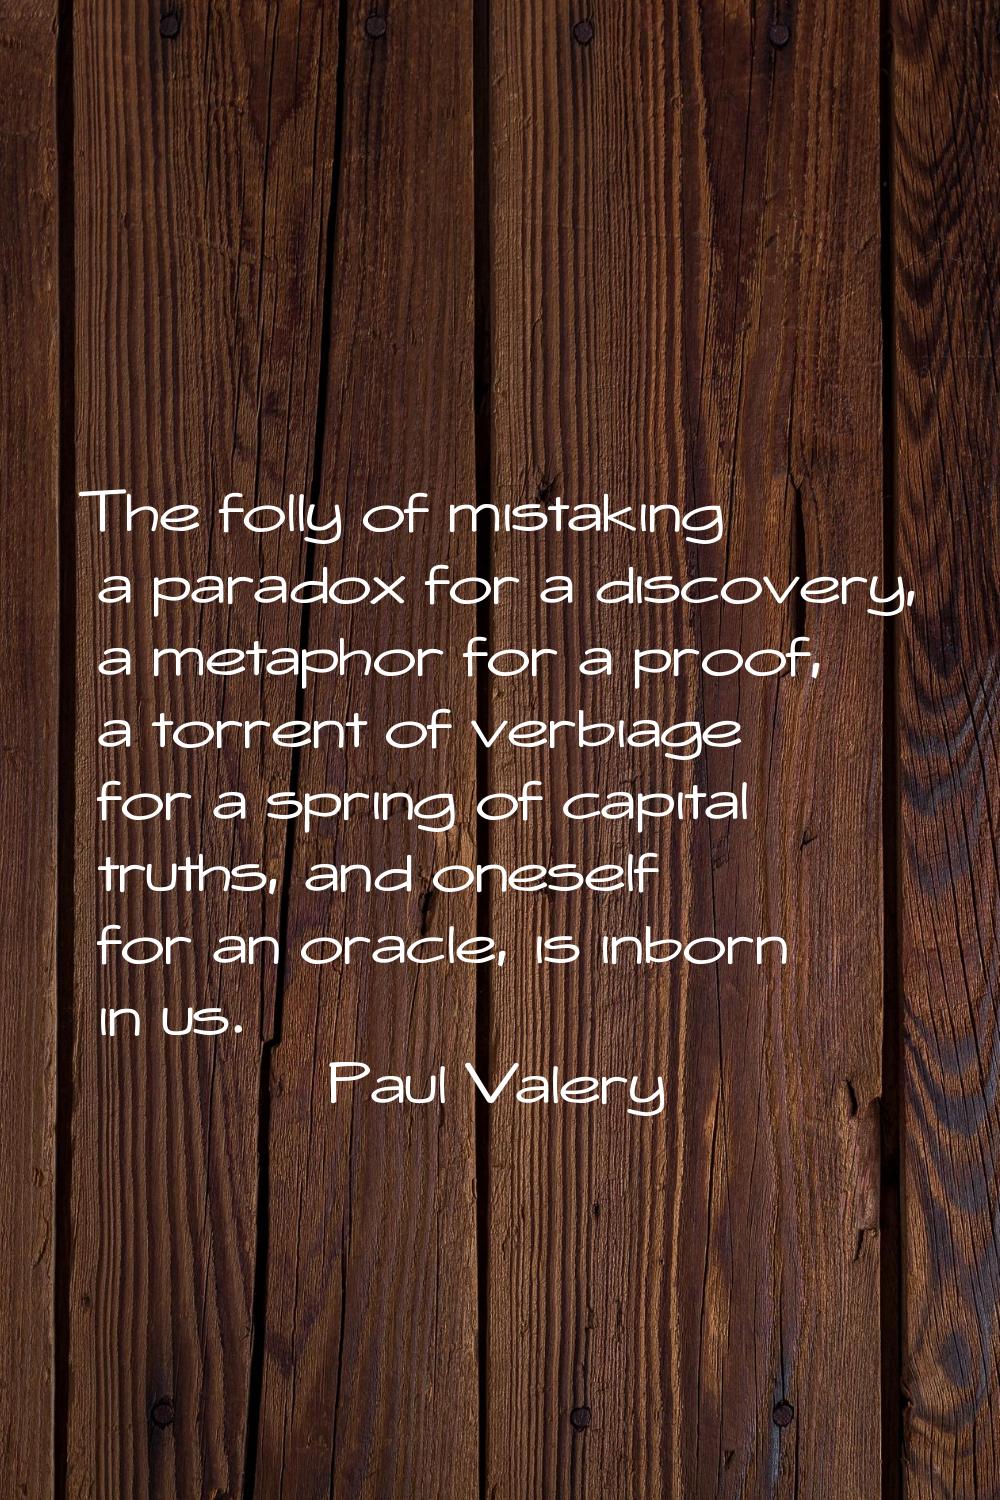 The folly of mistaking a paradox for a discovery, a metaphor for a proof, a torrent of verbiage for